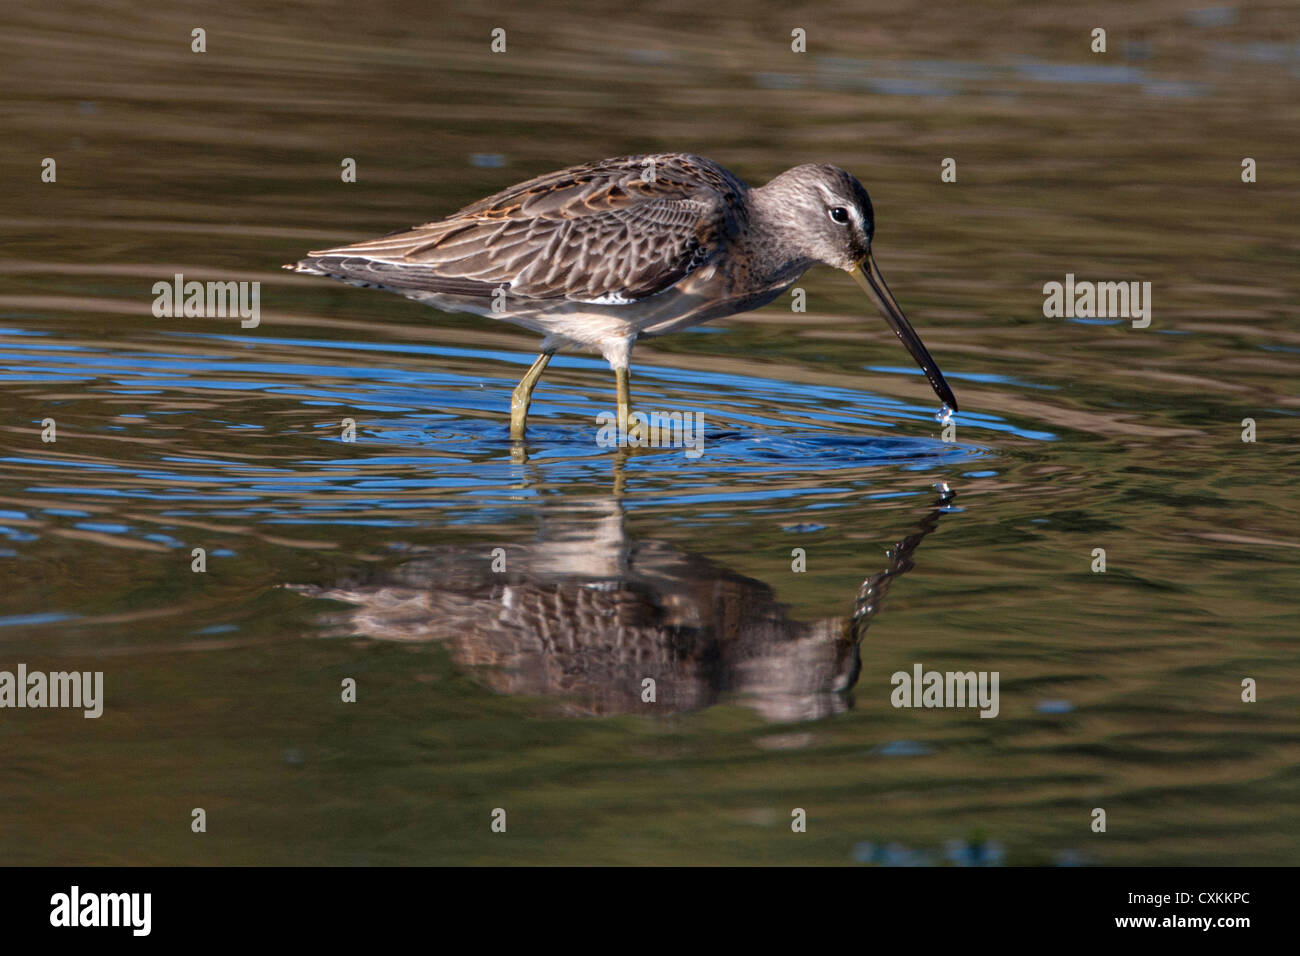 Long-billed Dowitcher Limnodromus scolopaceus feeding with reflection in water at French Creek, Vancouver Island, BC, Canada Stock Photo